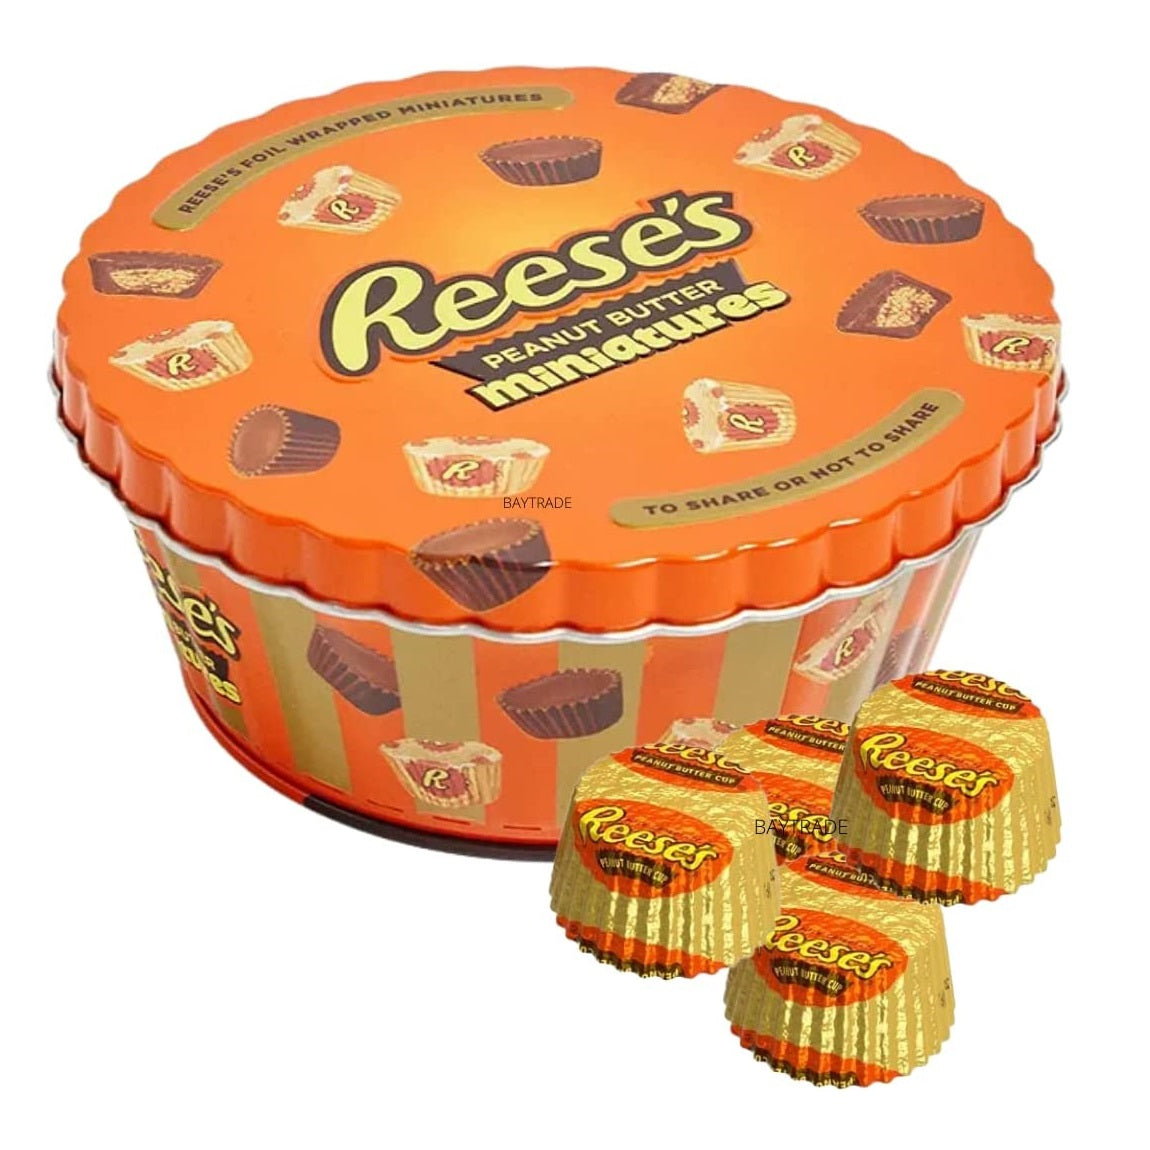 REESE'S PEANUT BUTTER CUP MINIATURES GIFT TIN 345G